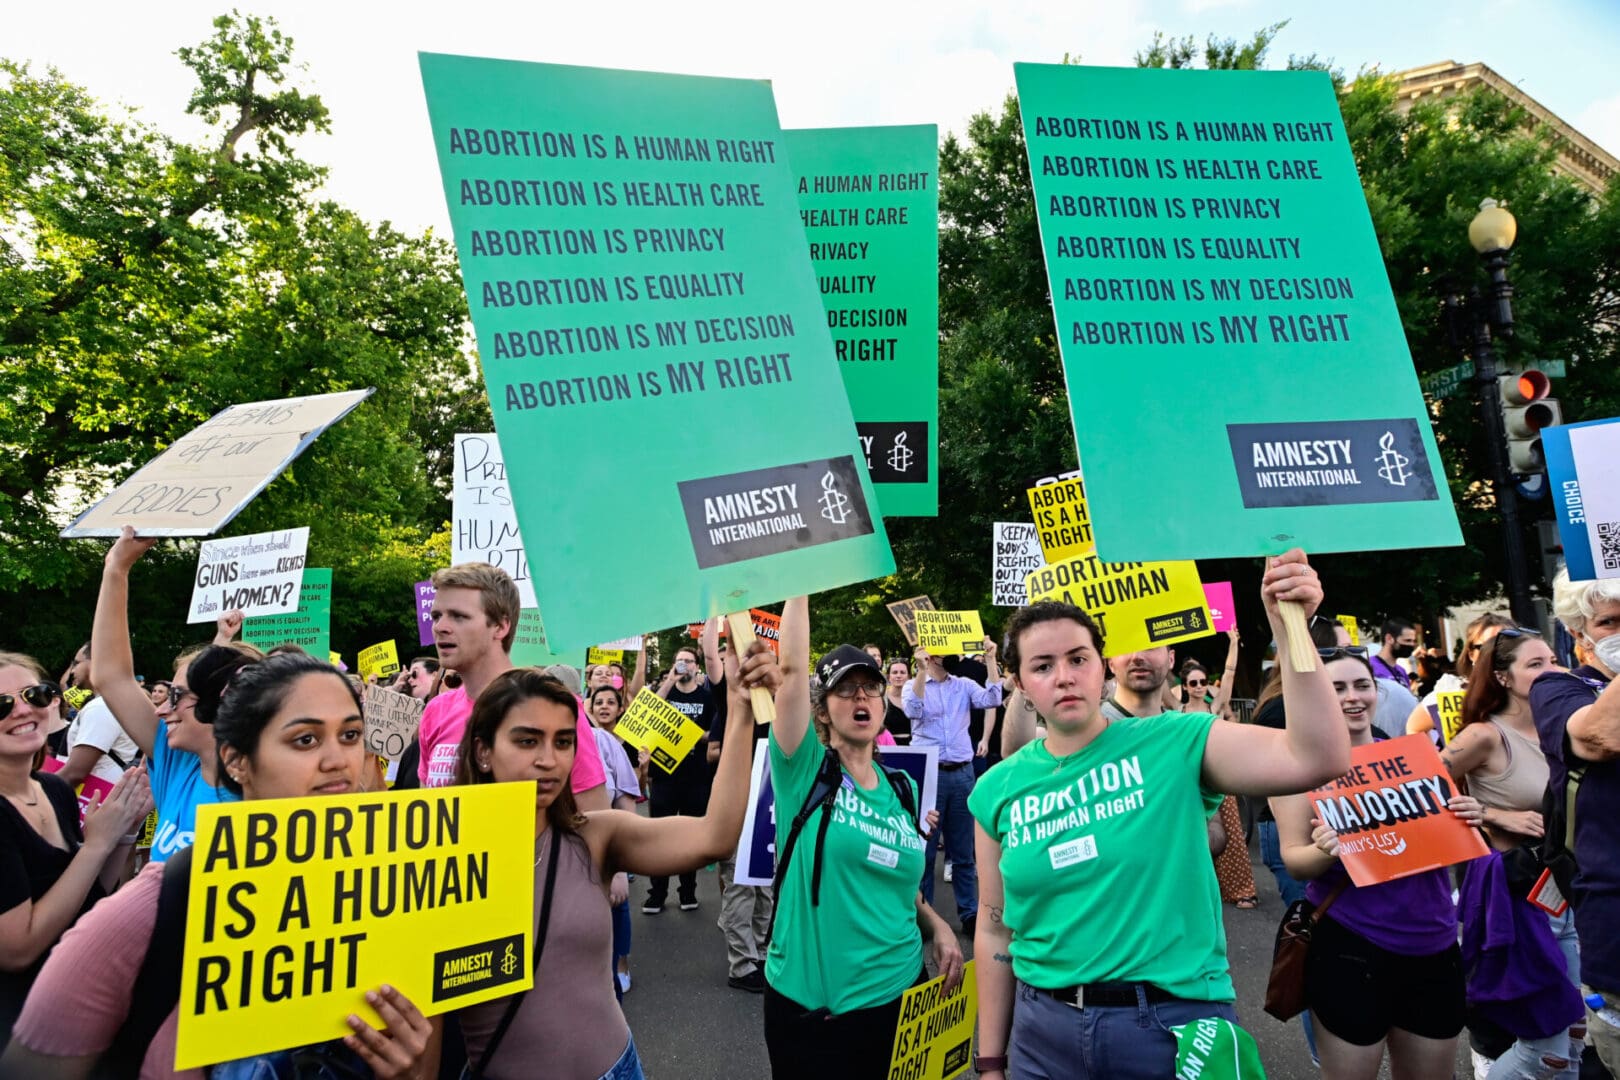 AIUSA supporters protesting for abortion rights